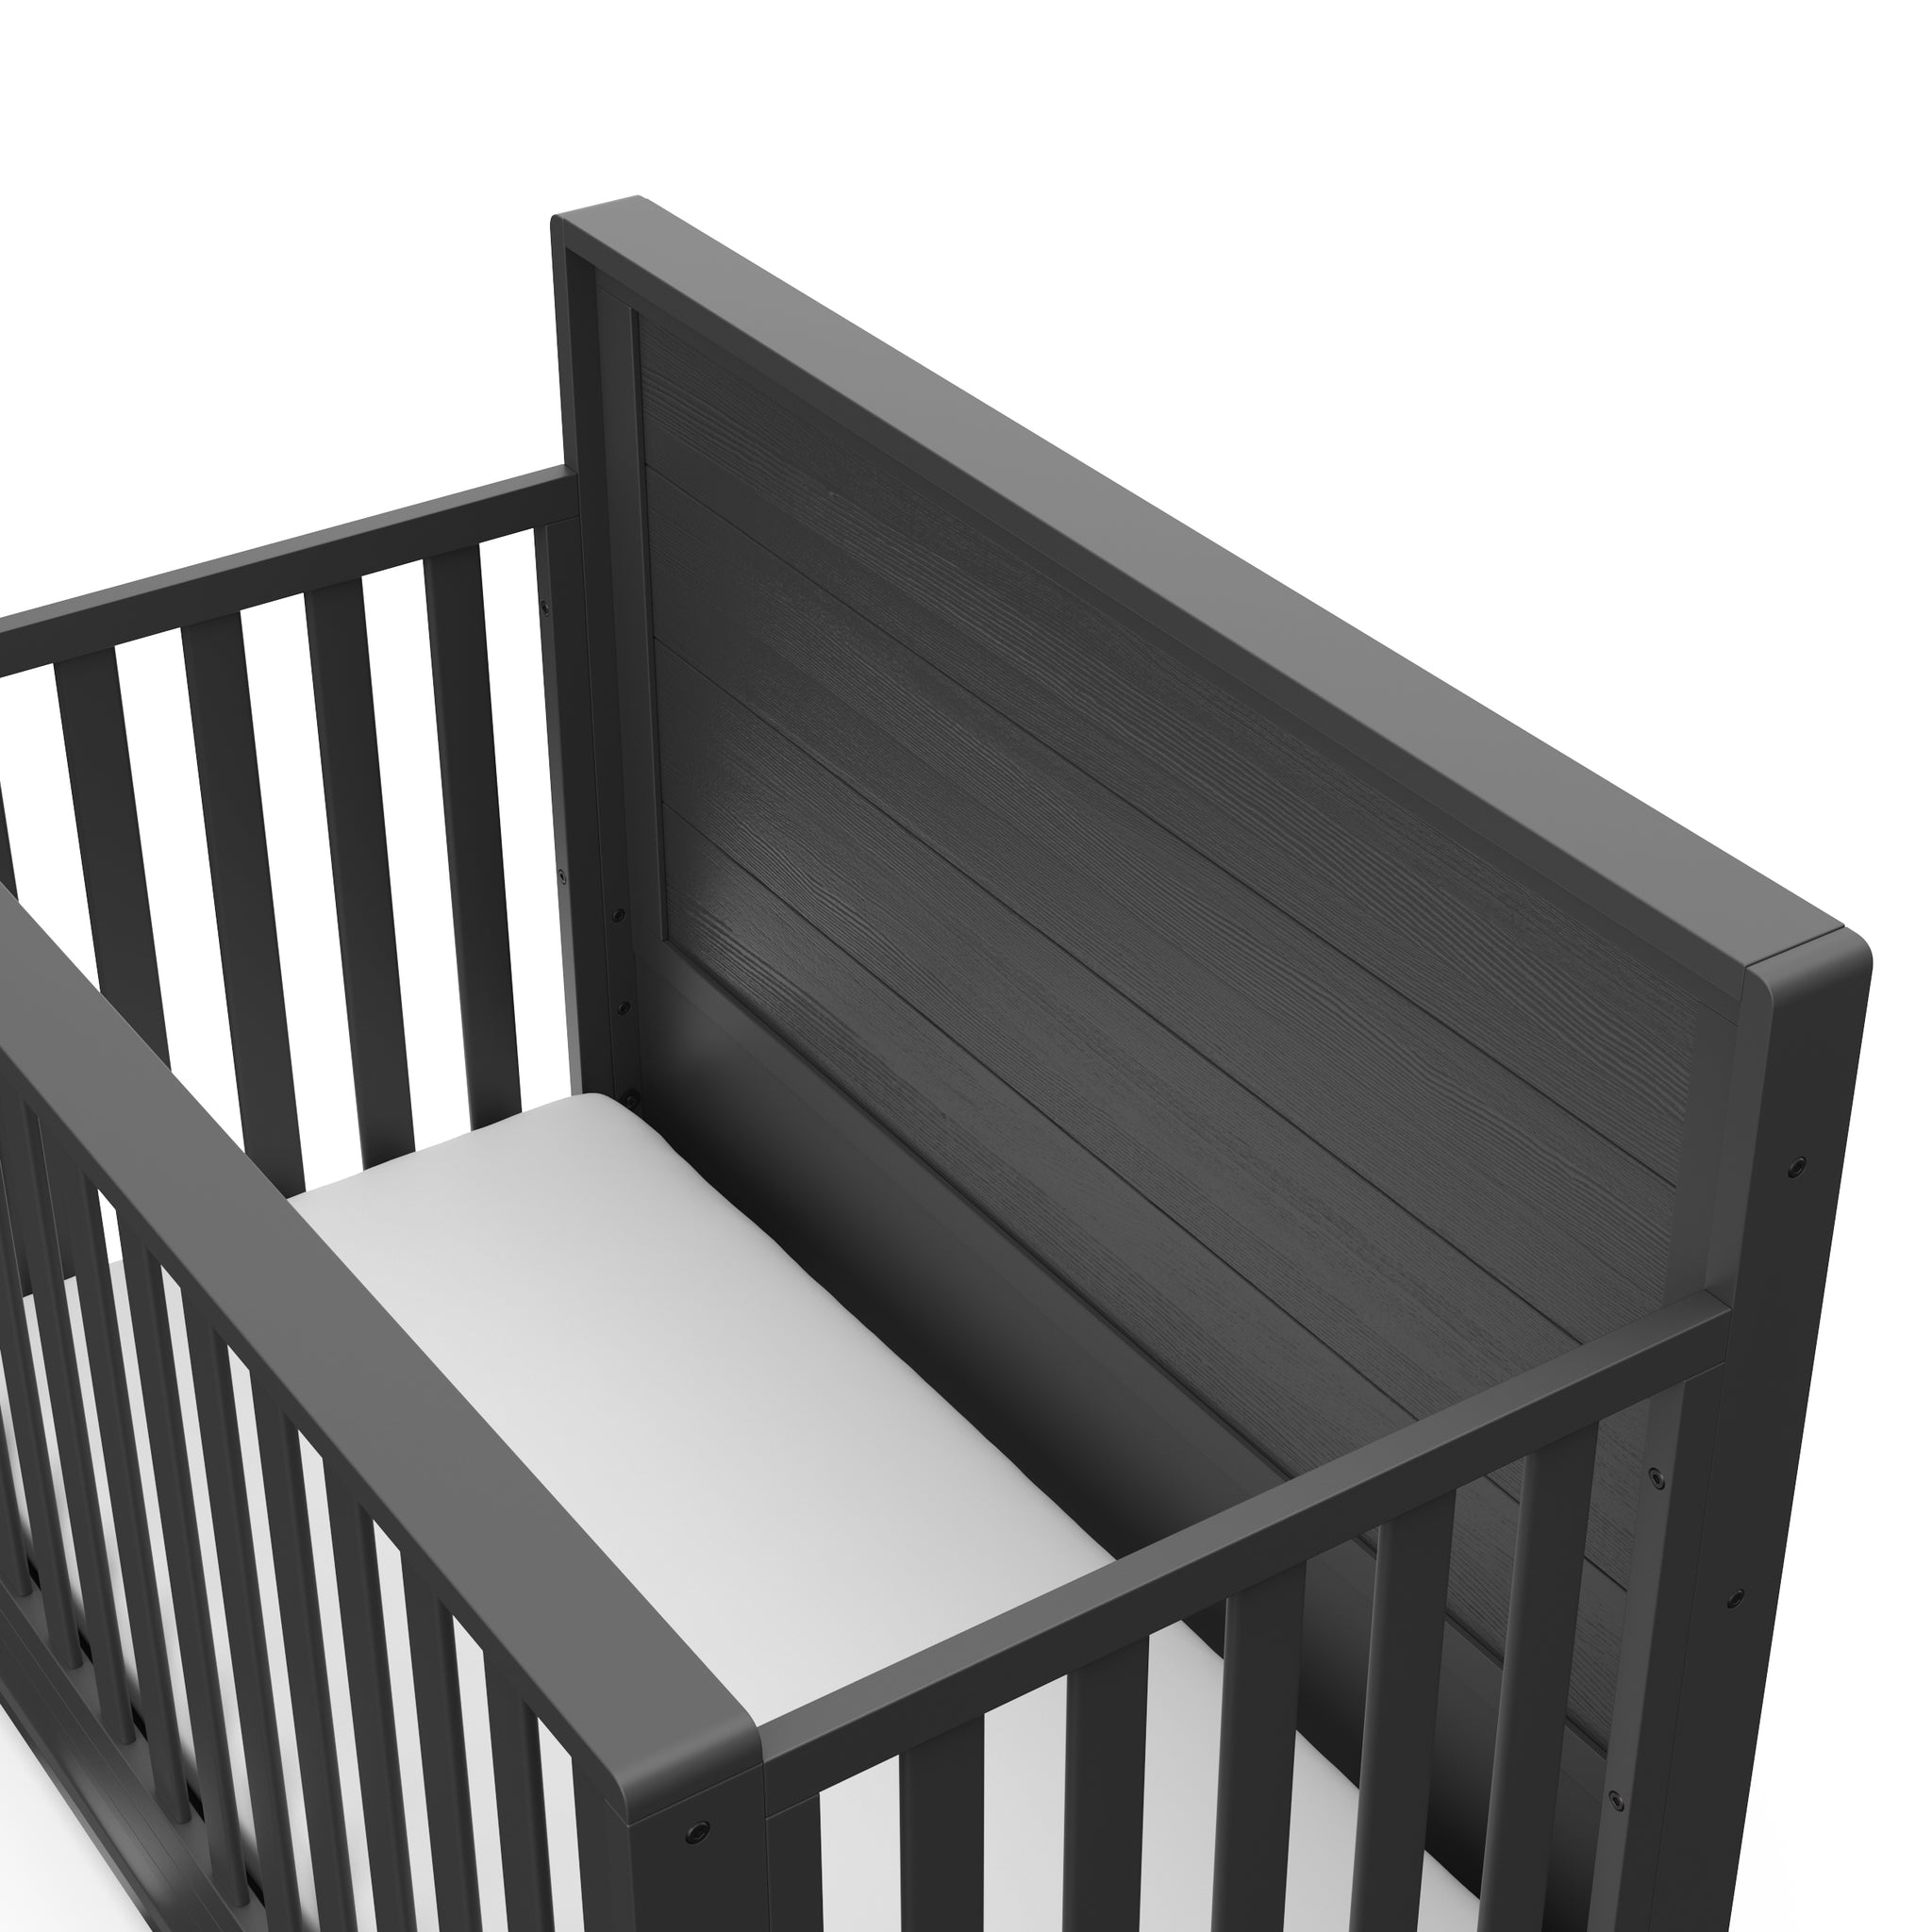 Close-up view of gray crib with drawer headboard